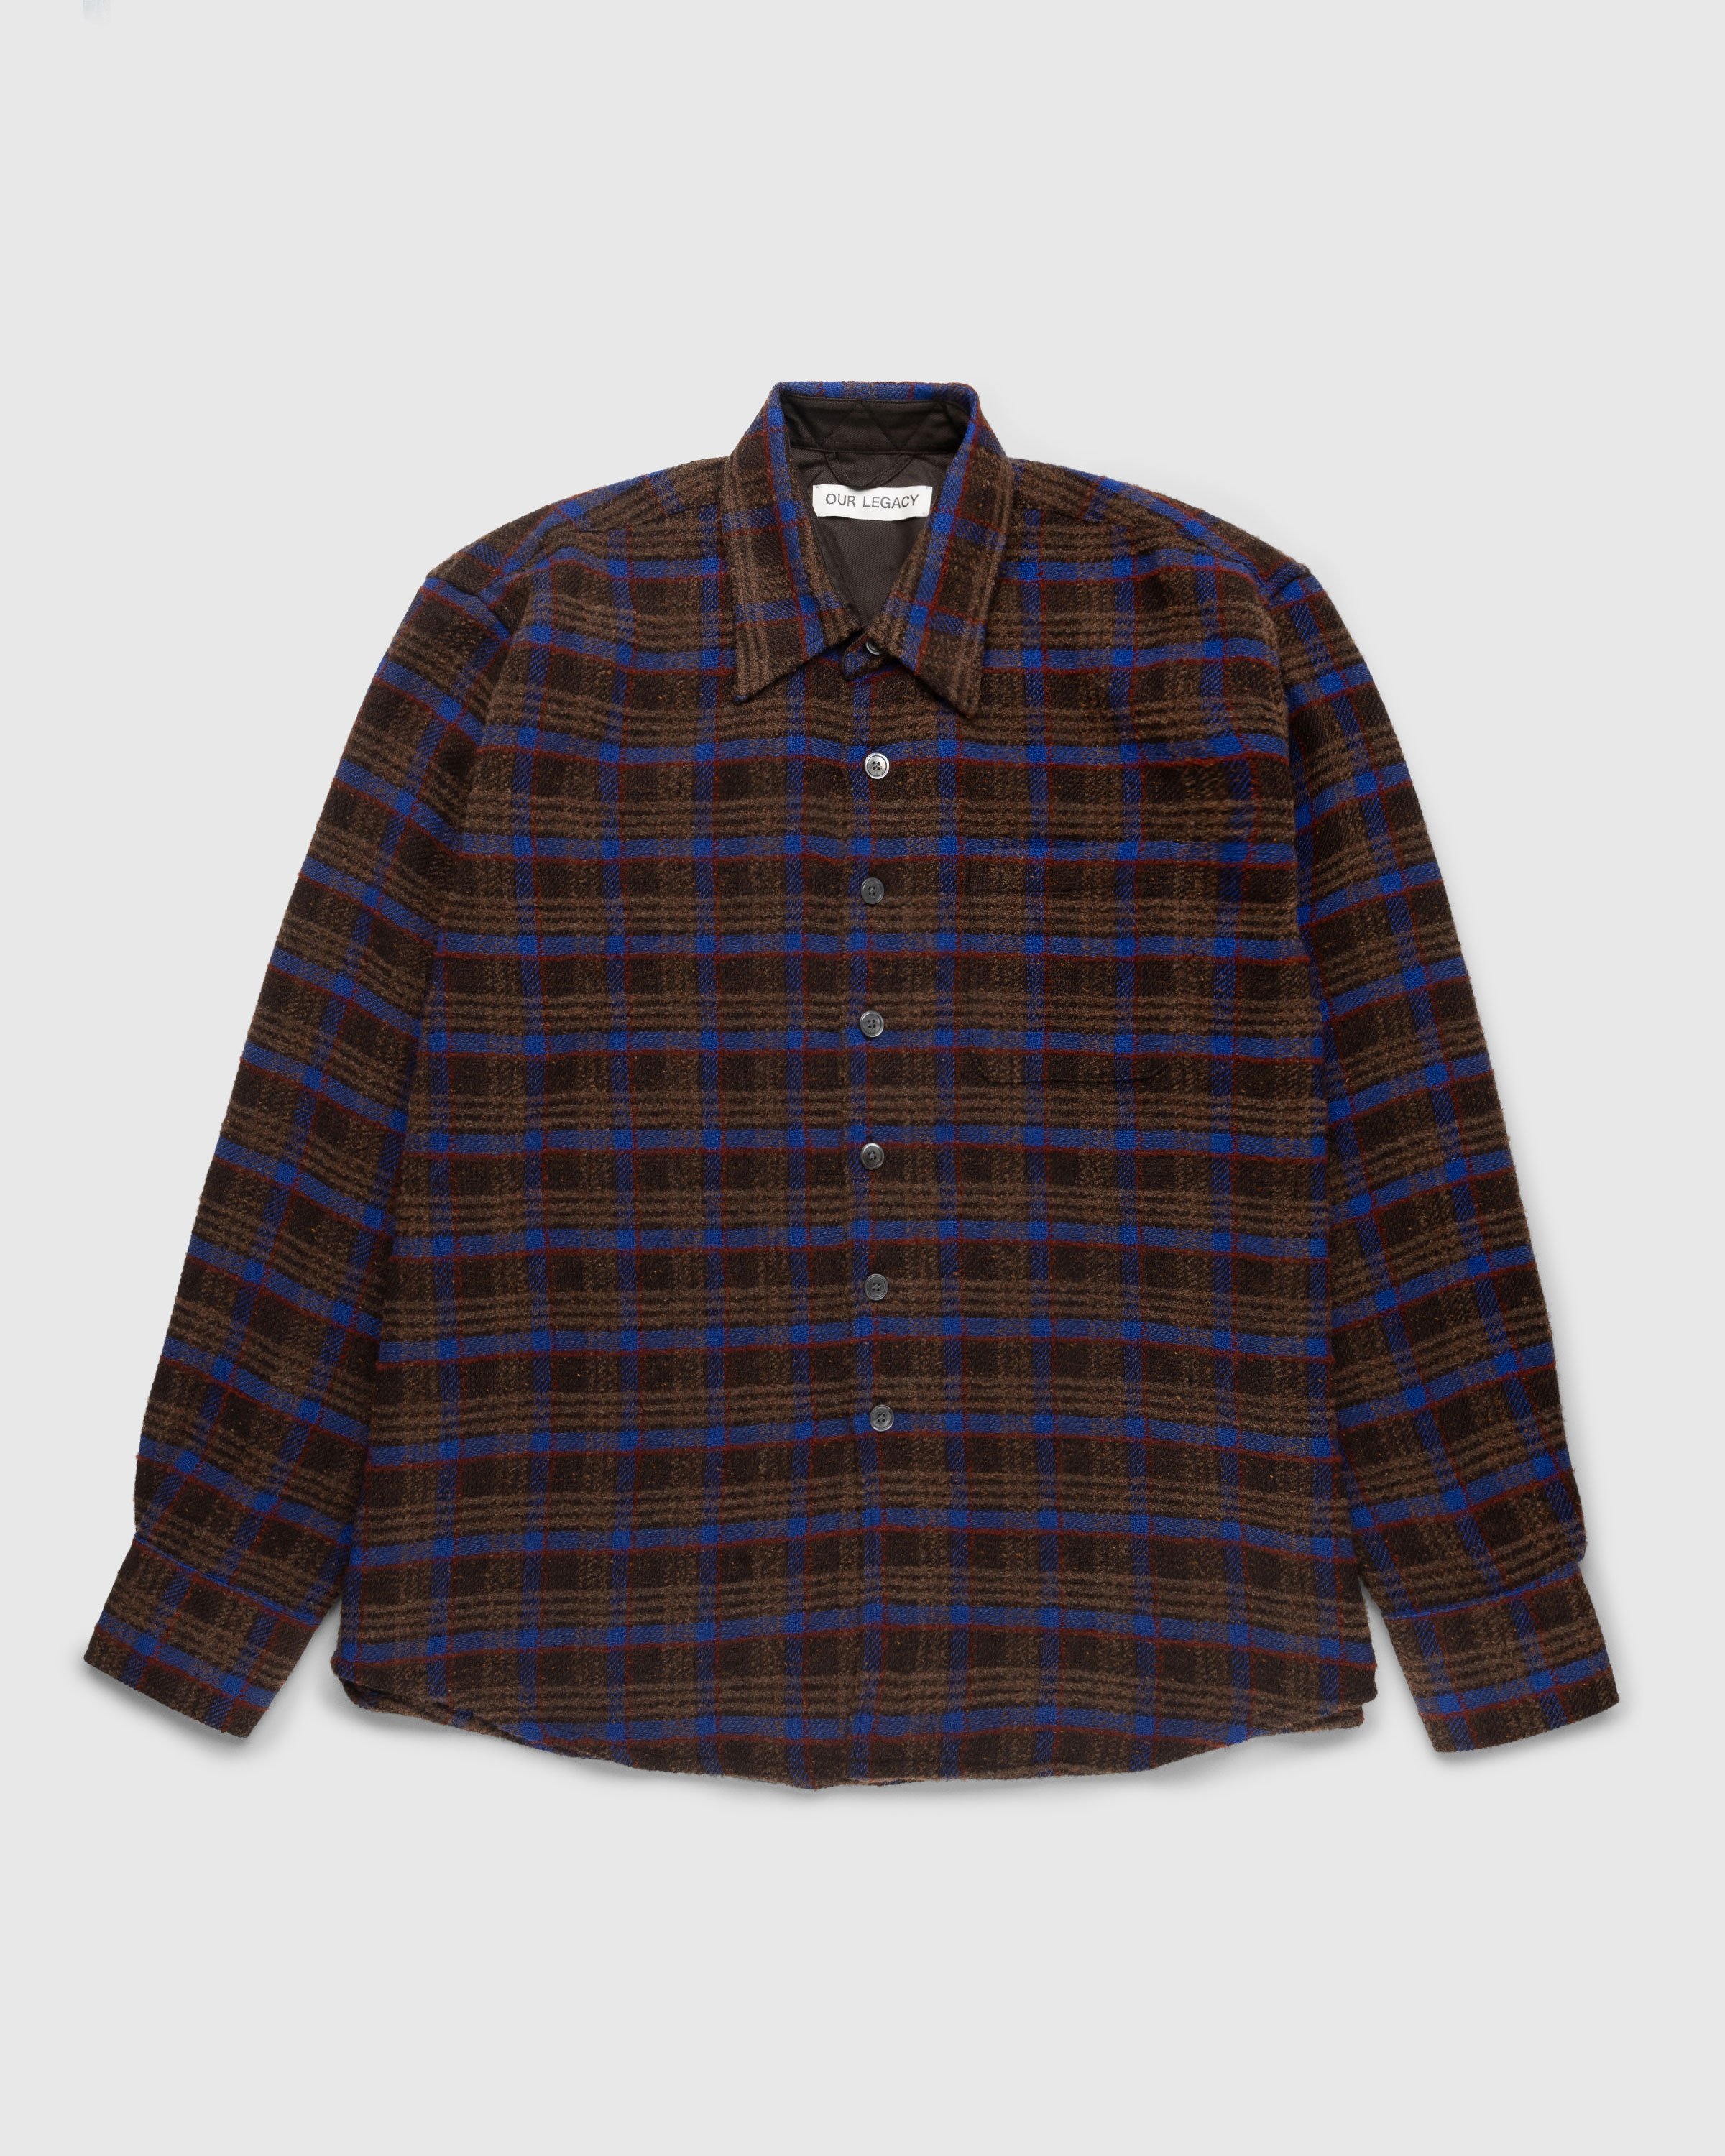 Our Legacy – Above Shirt Brown Pankow Check | Highsnobiety Shop